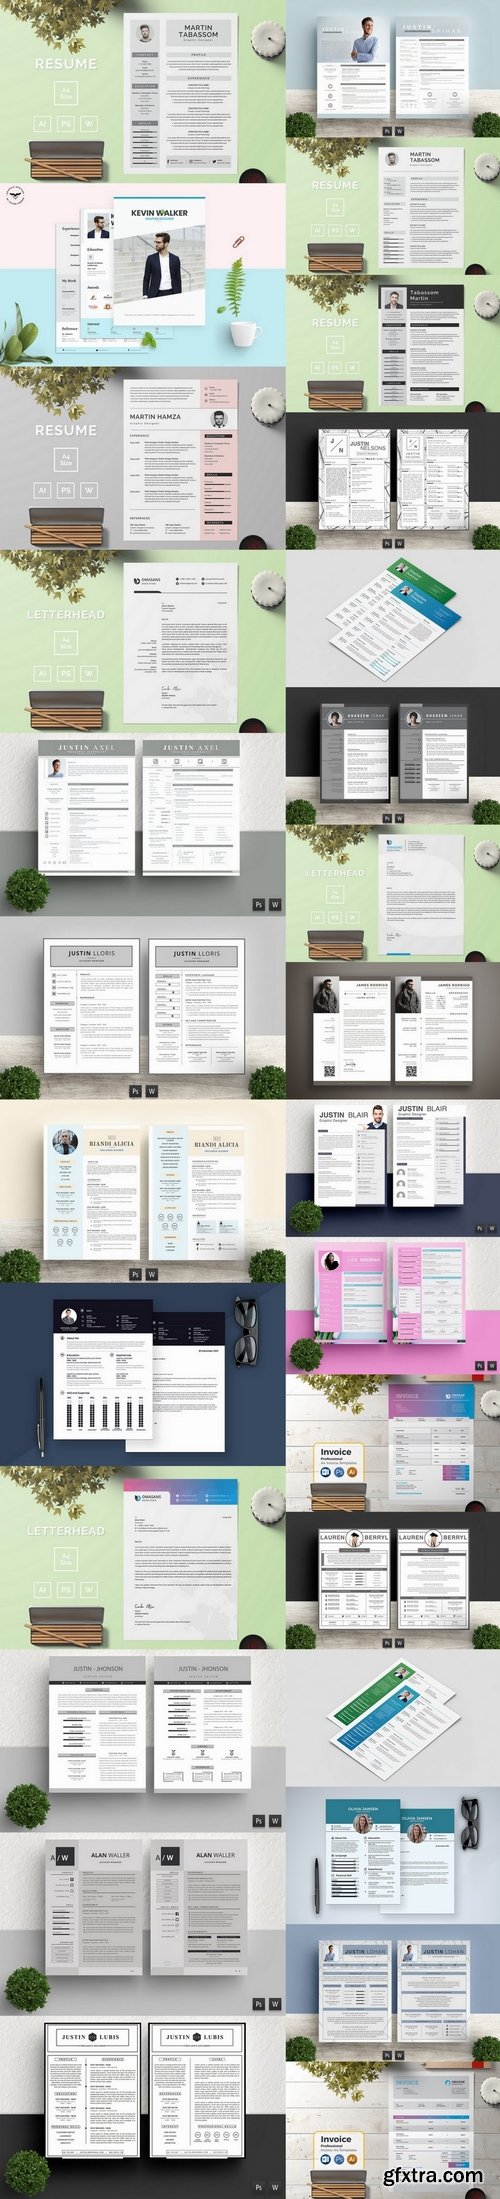 Professional Resume Cover Letter and Invioce Templates Pack